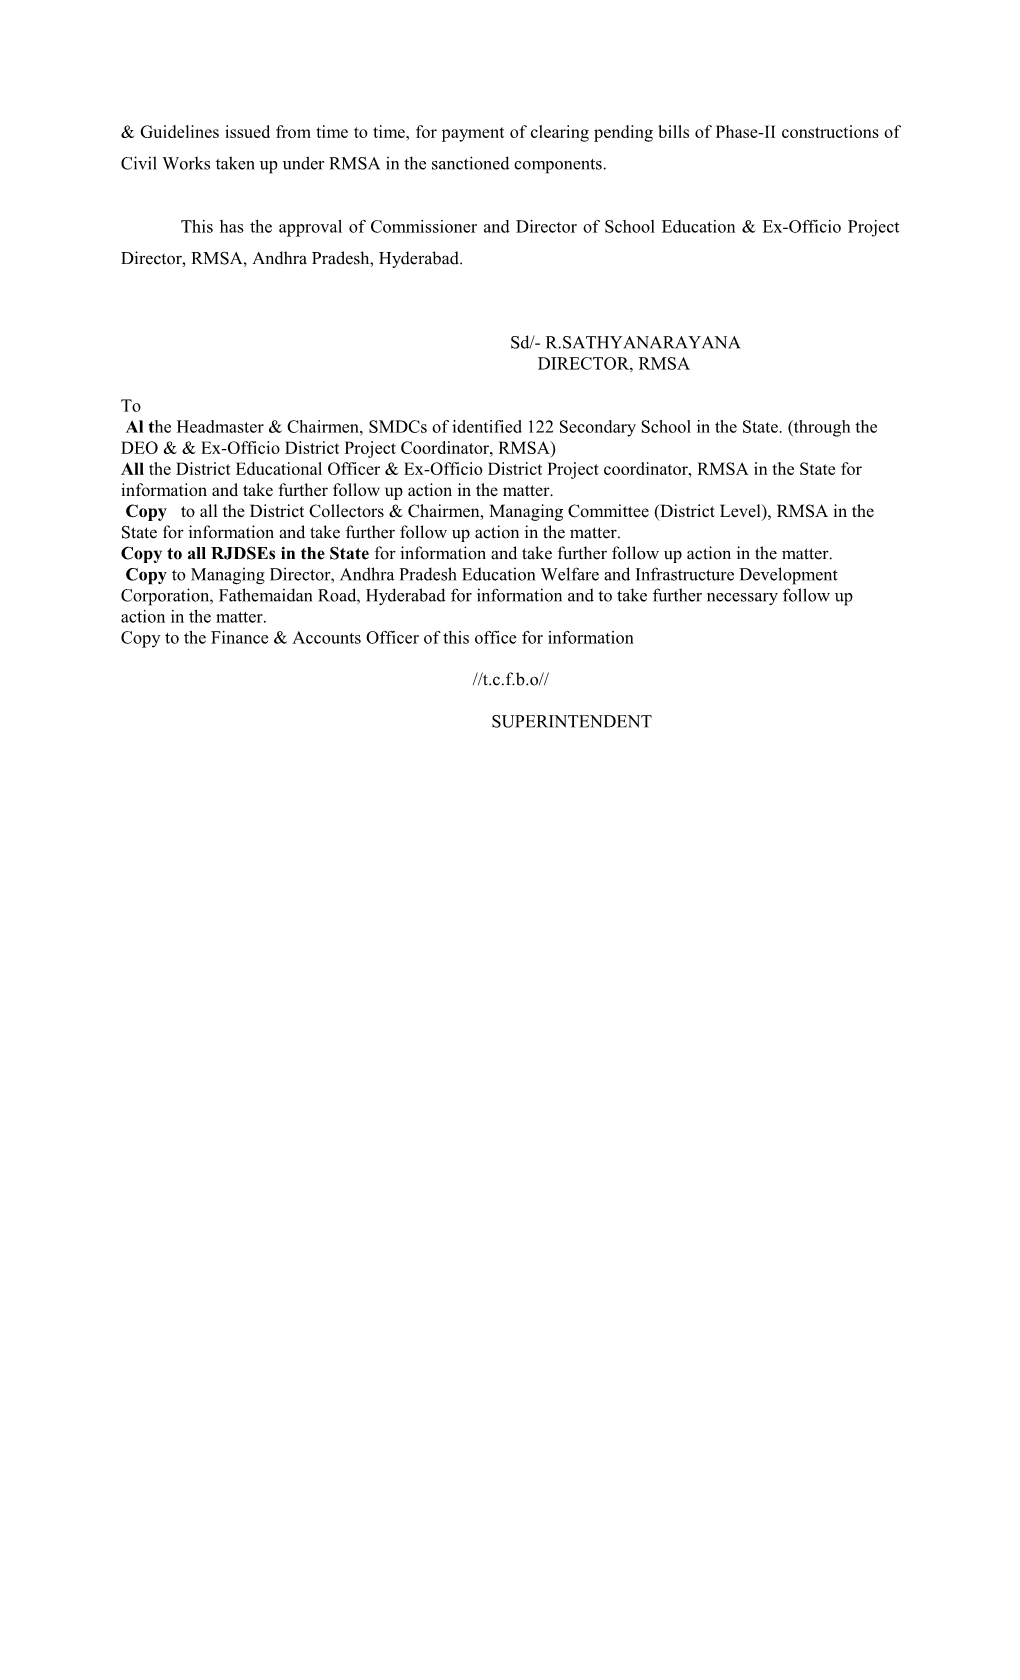 PROCEEDINGS of the DIRECTOR, RMSA, O/O. COMMISSIONER & DIRECTOR of SCHOOL EDUCATION AND